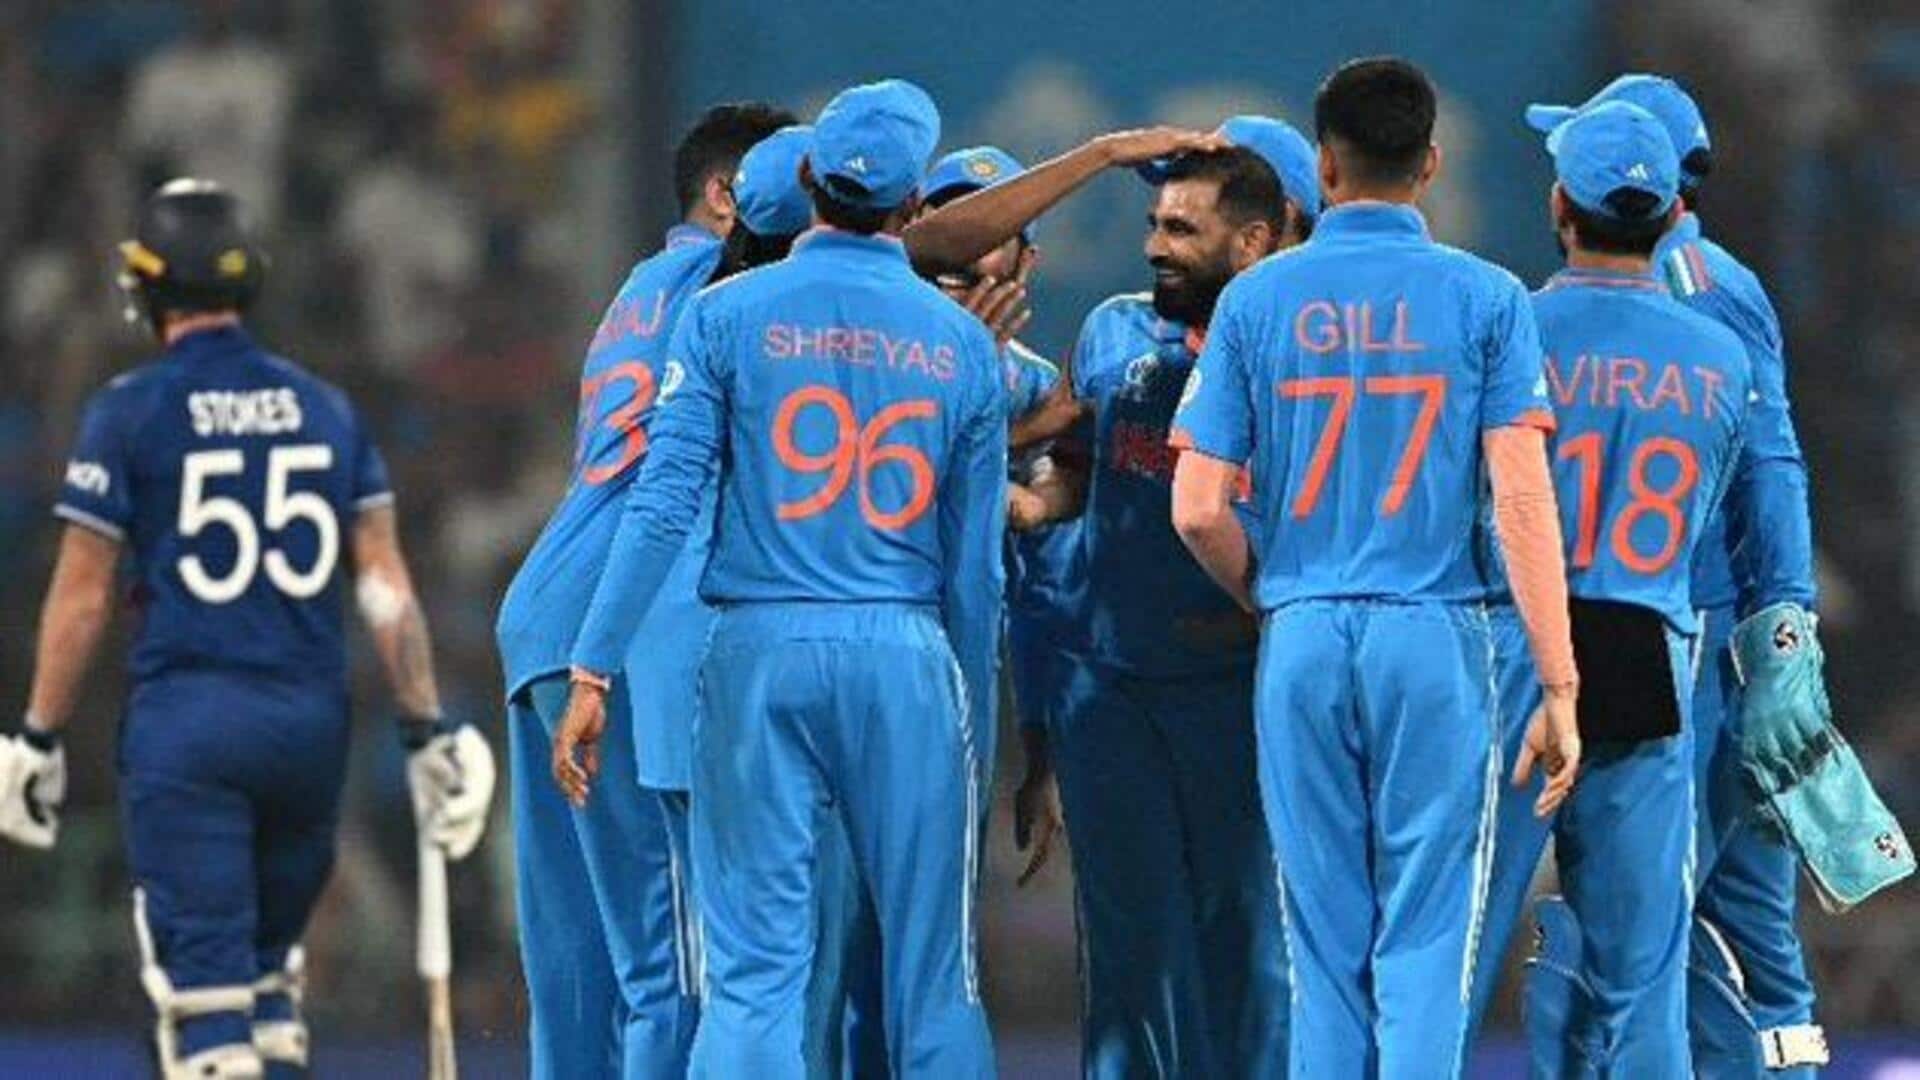 India go past NZ to claim this World Cup record